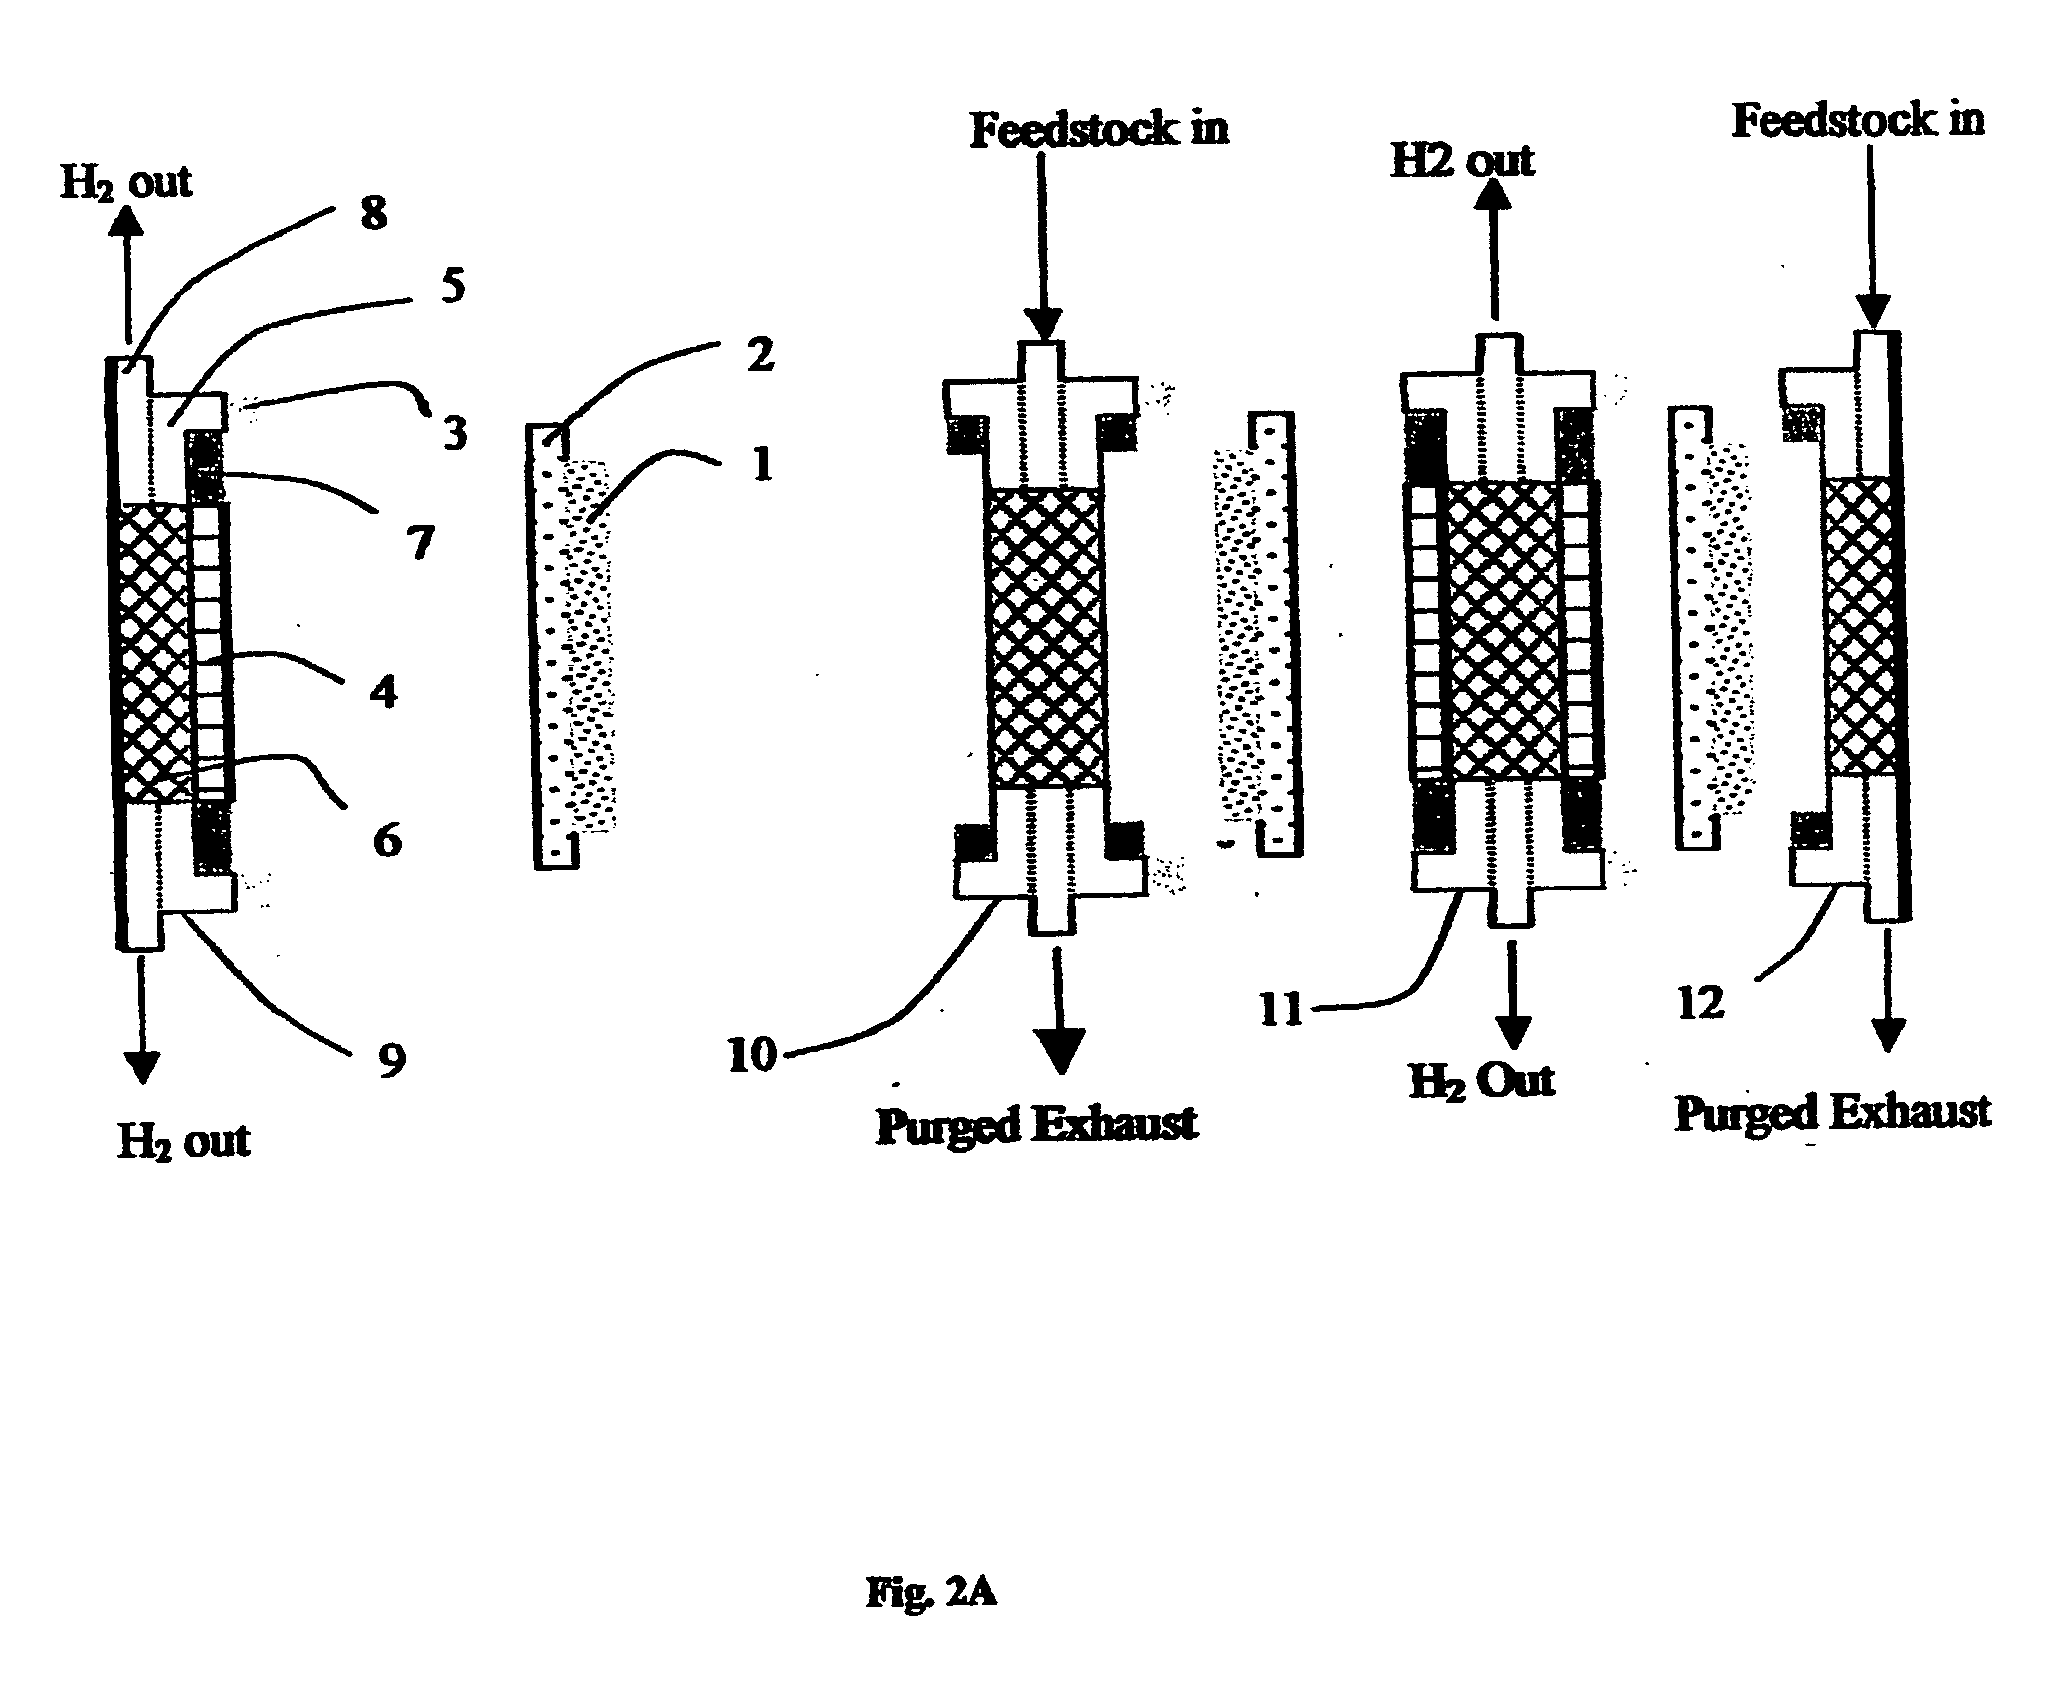 Single stage membrane reactor for high purity hydrogen production